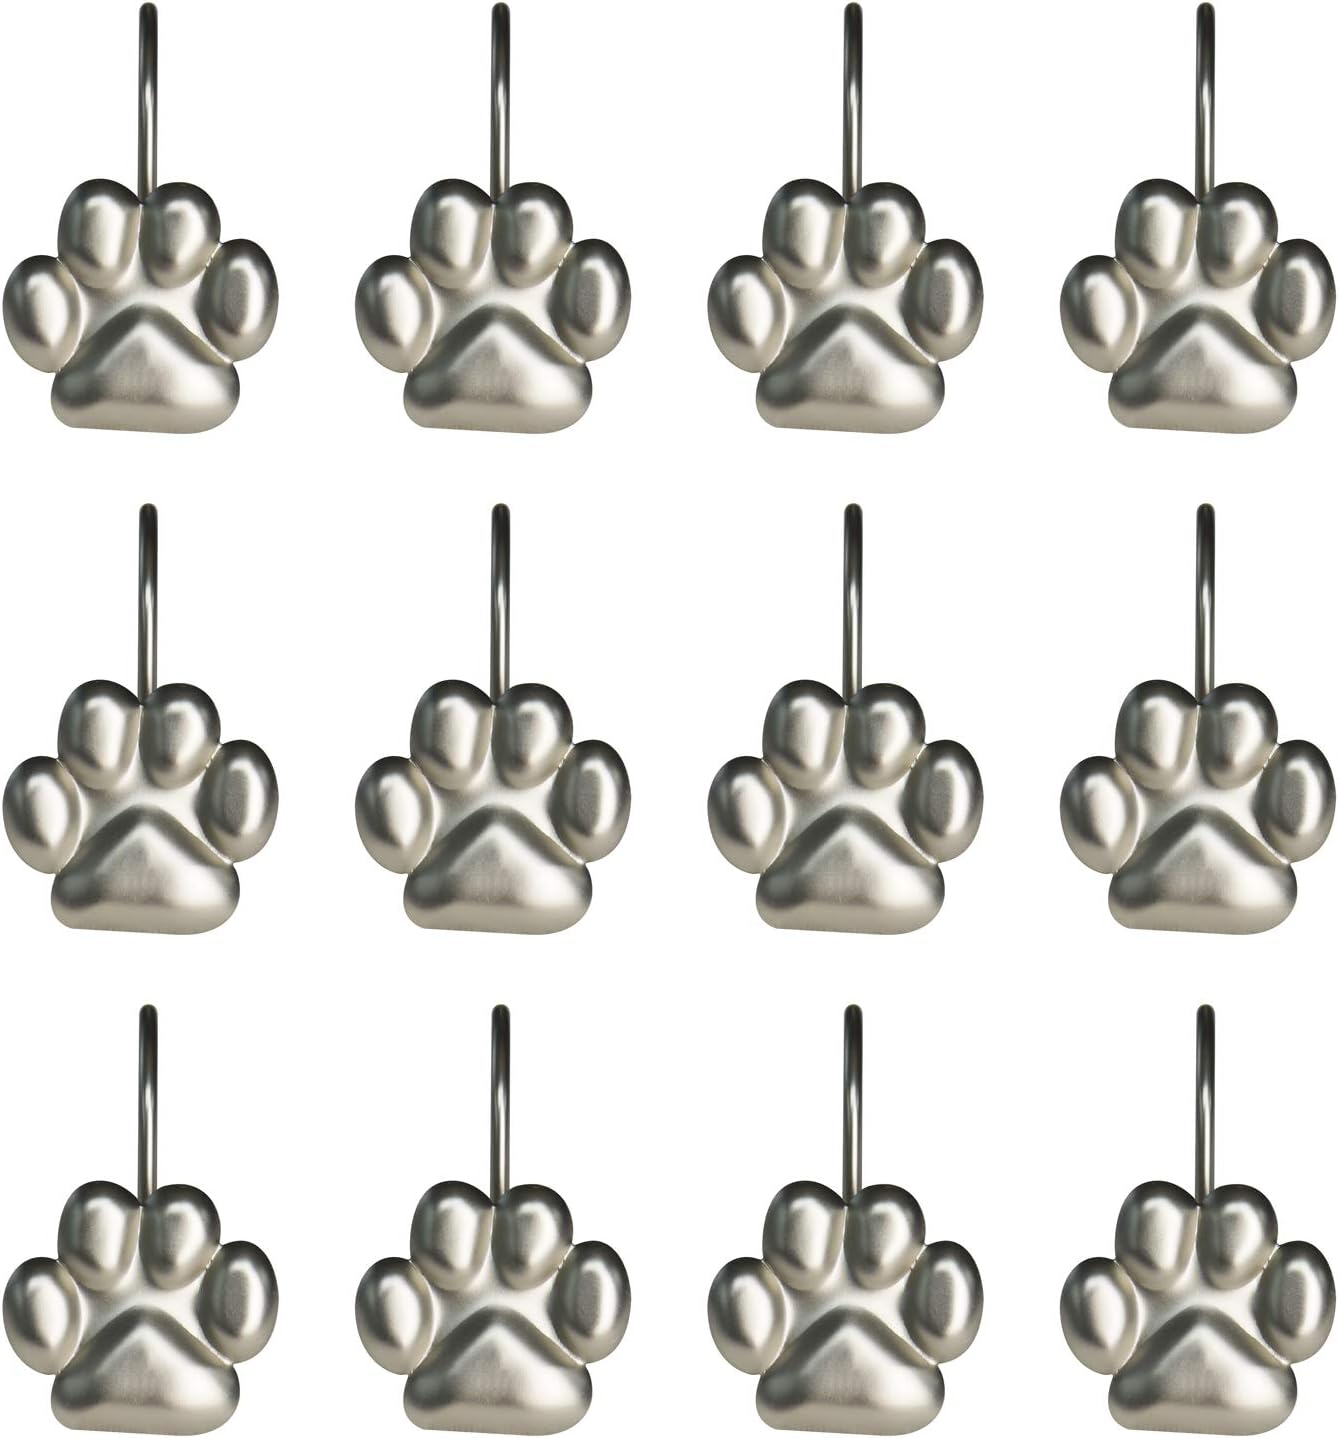 Sunlit Fashion Design Cute Paw Print Polished Shower Curtain Hooks for Dog Cat and Bear, Rust Proof Oil Rubbed Metal Shower Curtain Rings-12 Pack